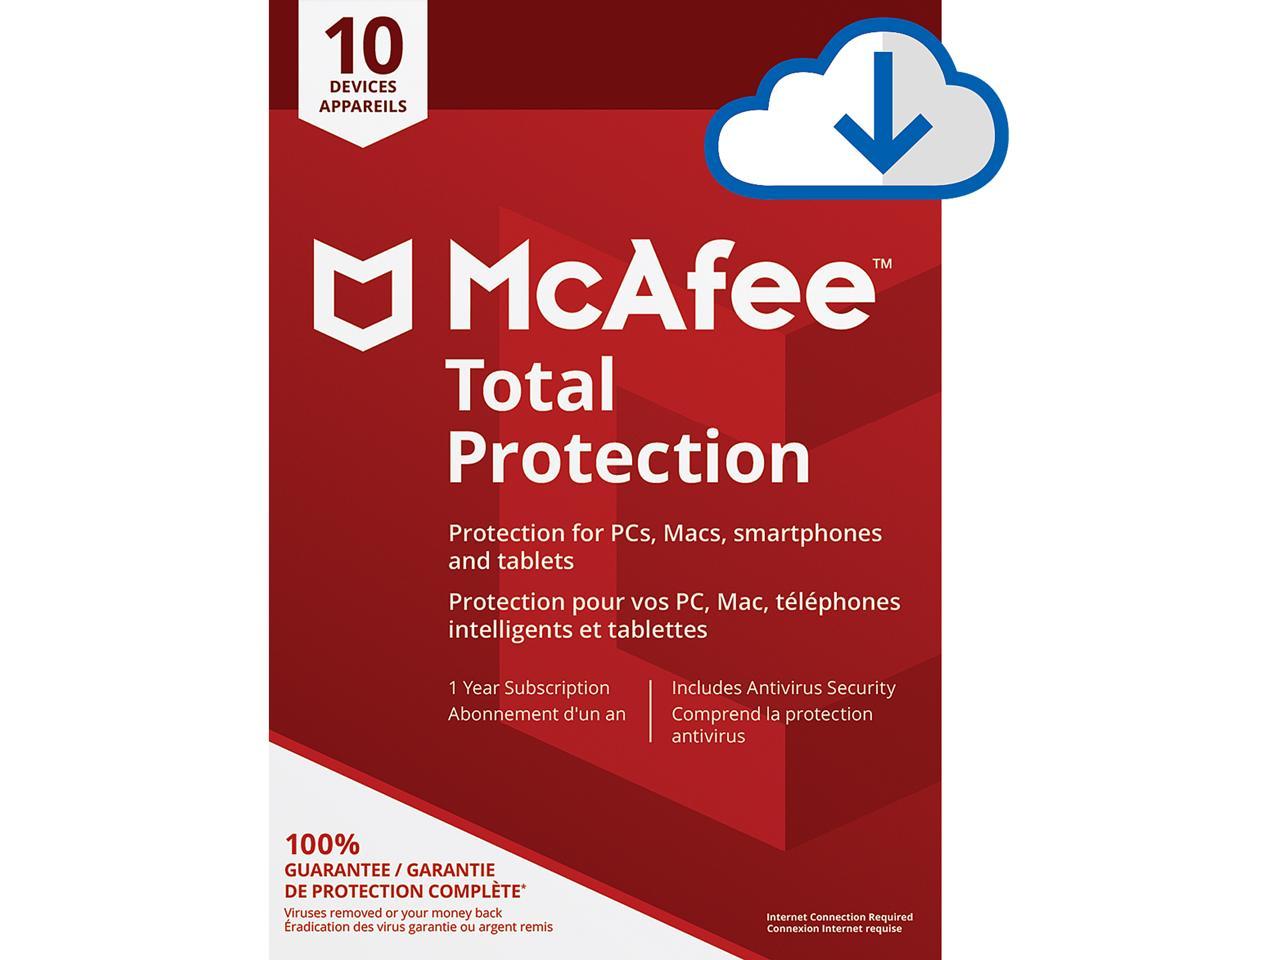 mcafee 5 device protection